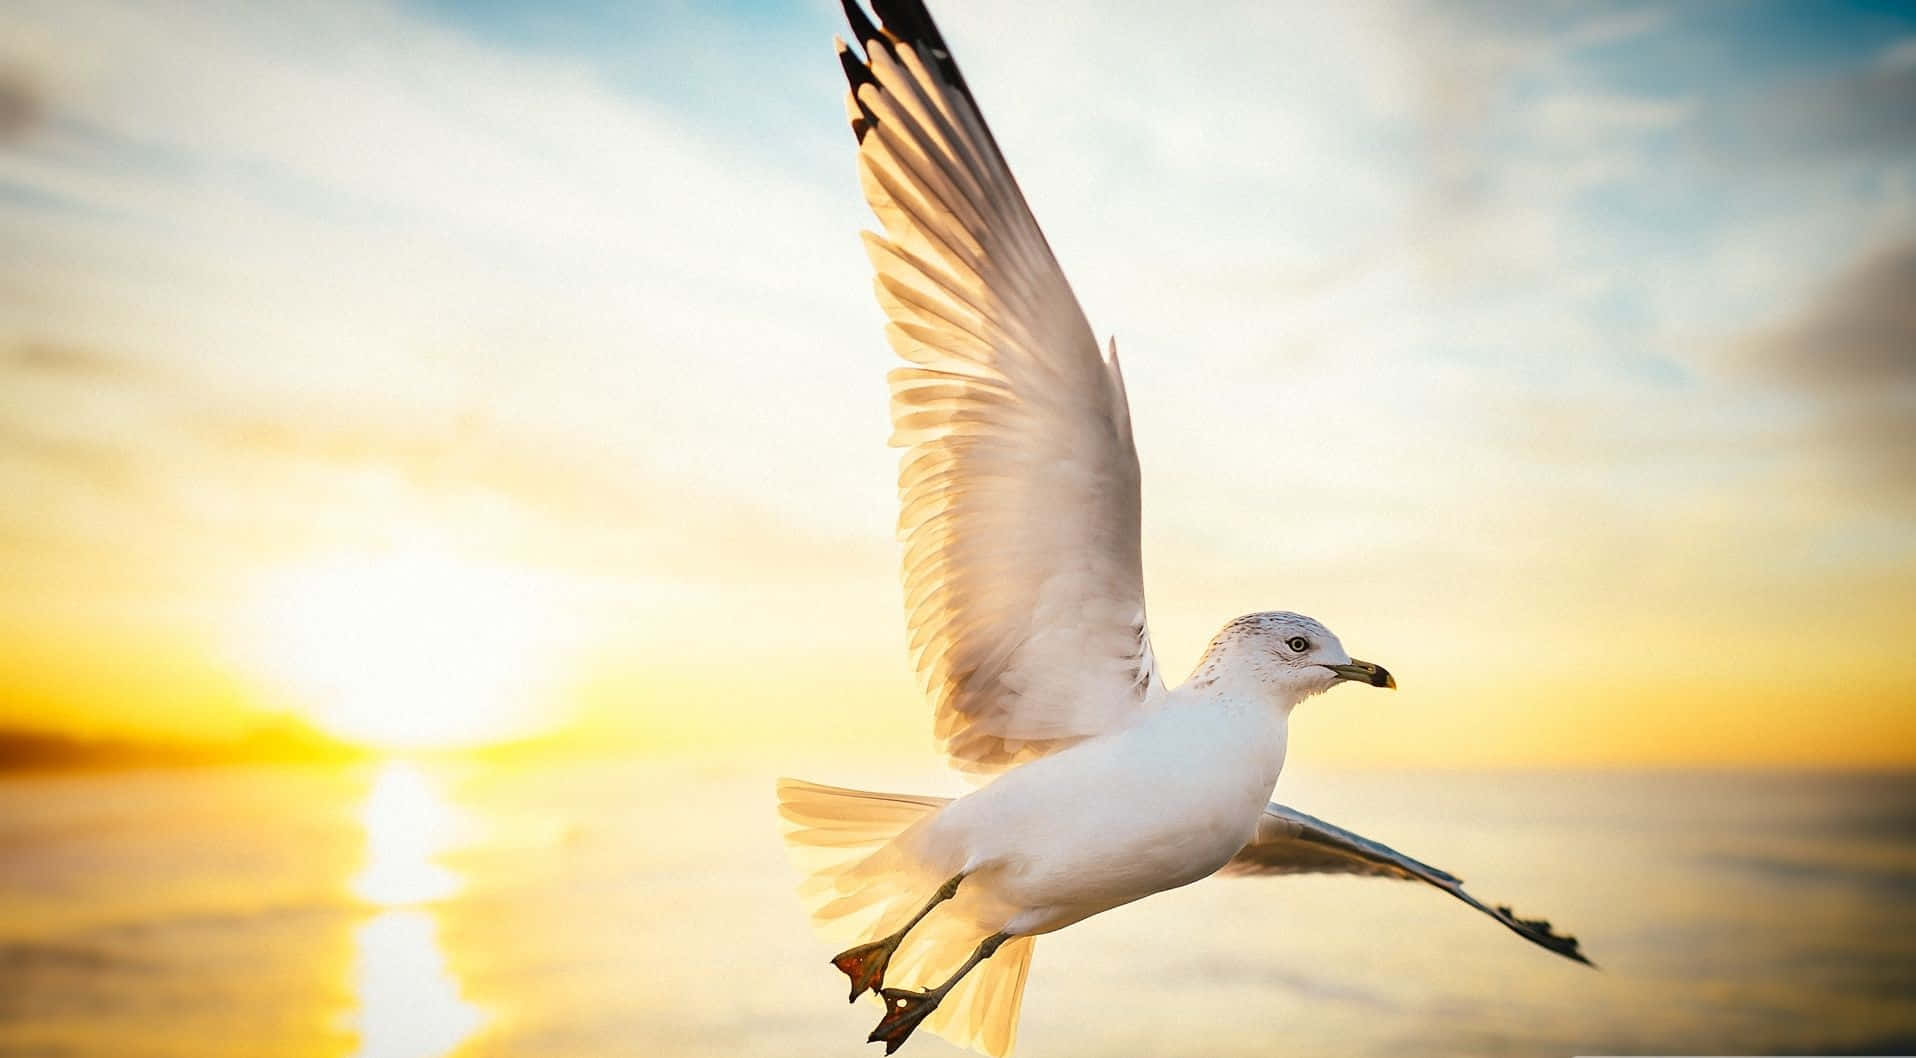 Caption: Majestic Seagull Soaring In The Sky Background